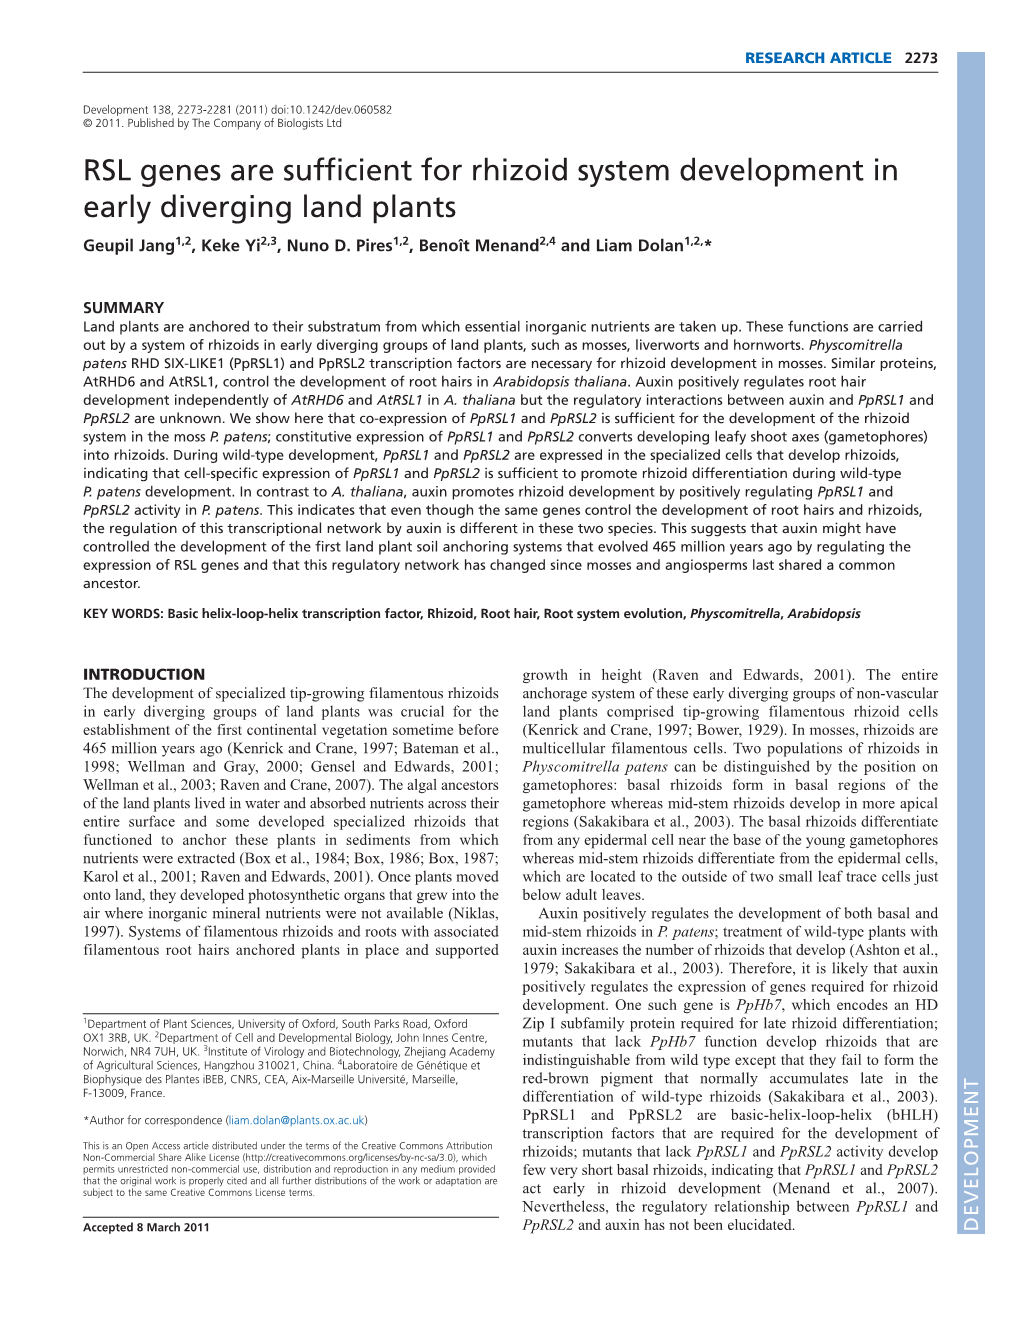 RSL Genes Are Sufficient for Rhizoid System Development in Early Diverging Land Plants Geupil Jang1,2, Keke Yi2,3, Nuno D